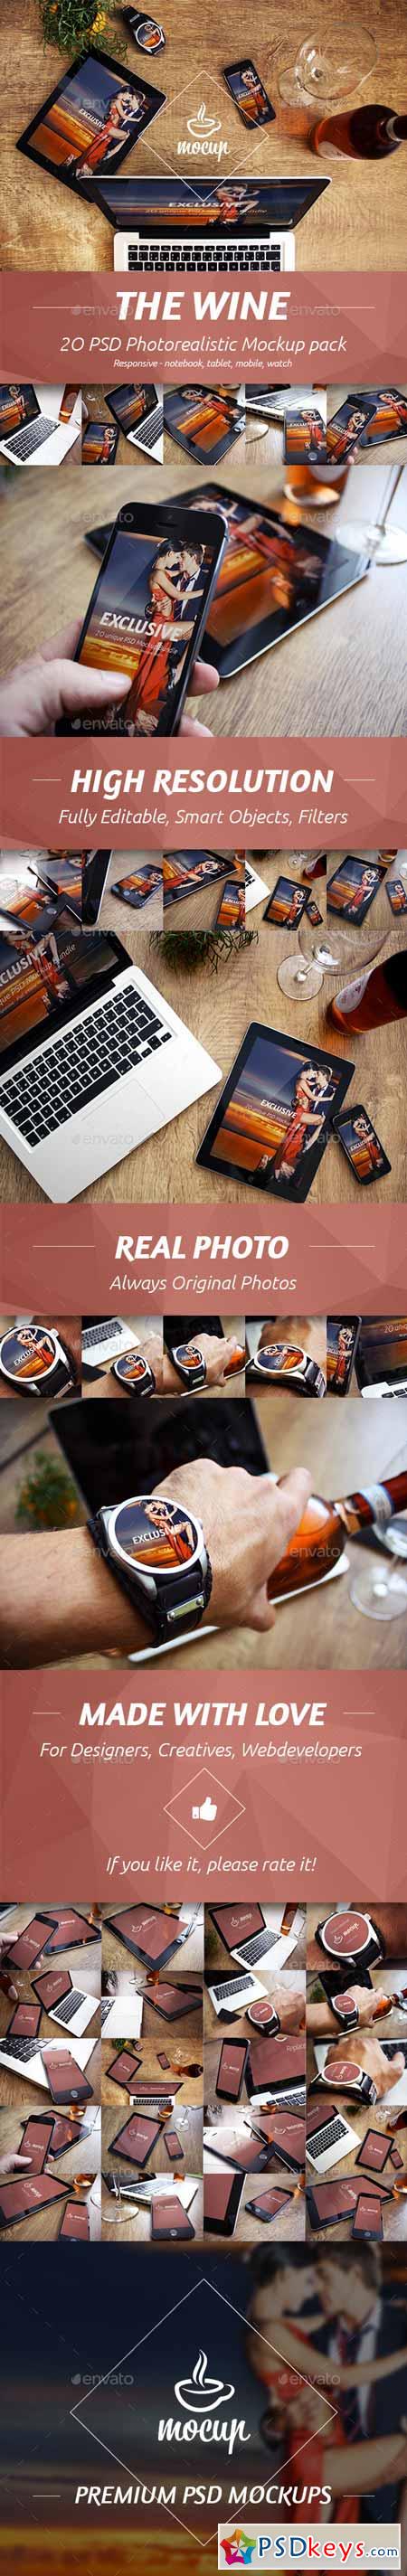 The Wine - 20 PSD Photorealistic Mockup Pack 9984450